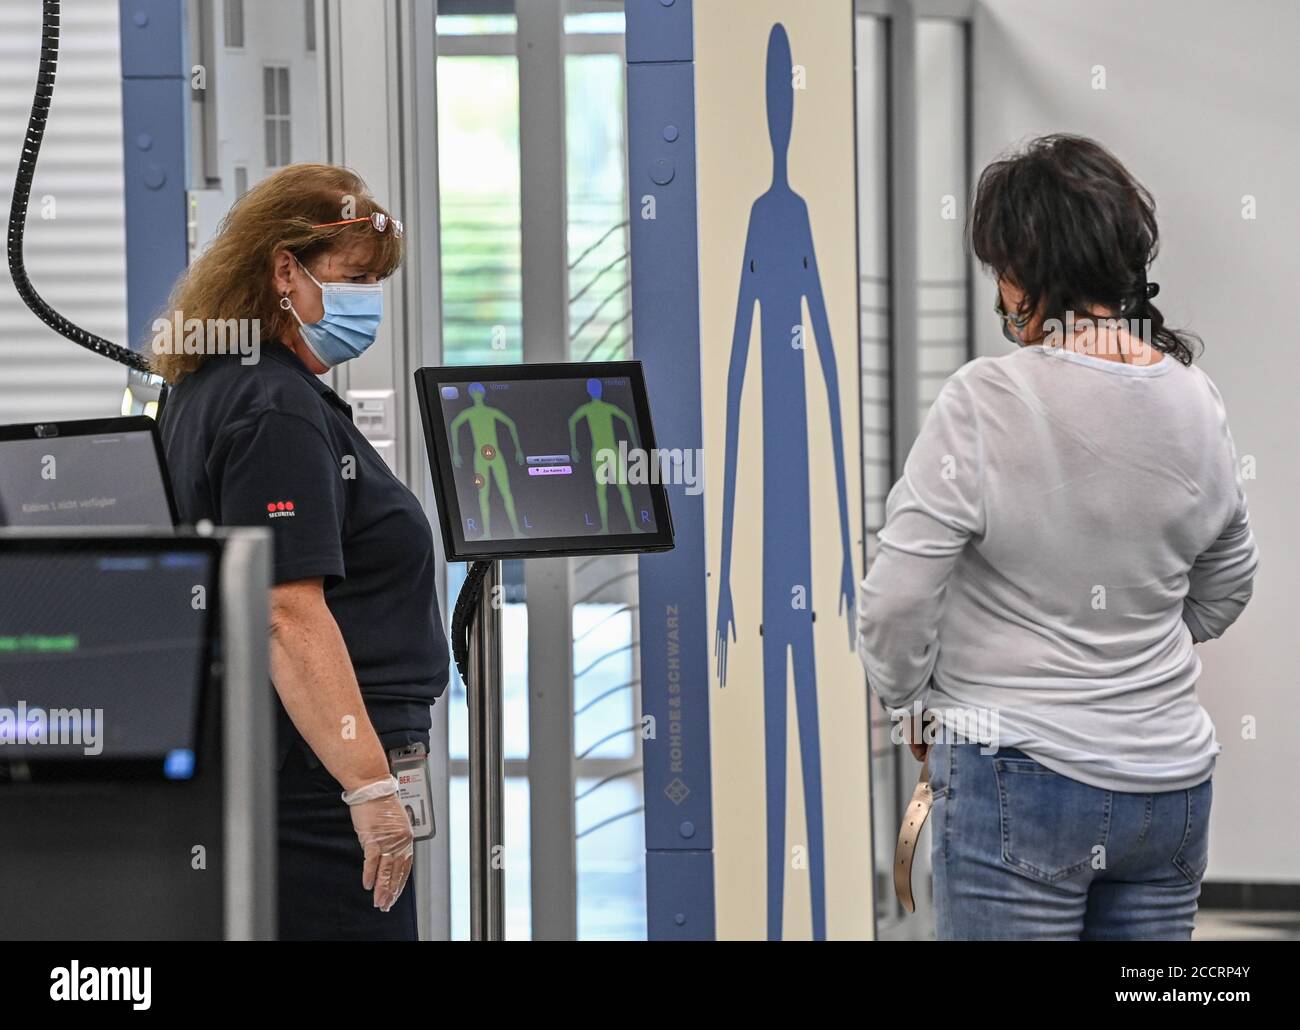 24 August 2020, Brandenburg, Schönefeld: A traveler (r) is checked at the  body scanner by a member of the security control staff in the building of  Terminal T5 at Berlin-Schönefeld Airport. On